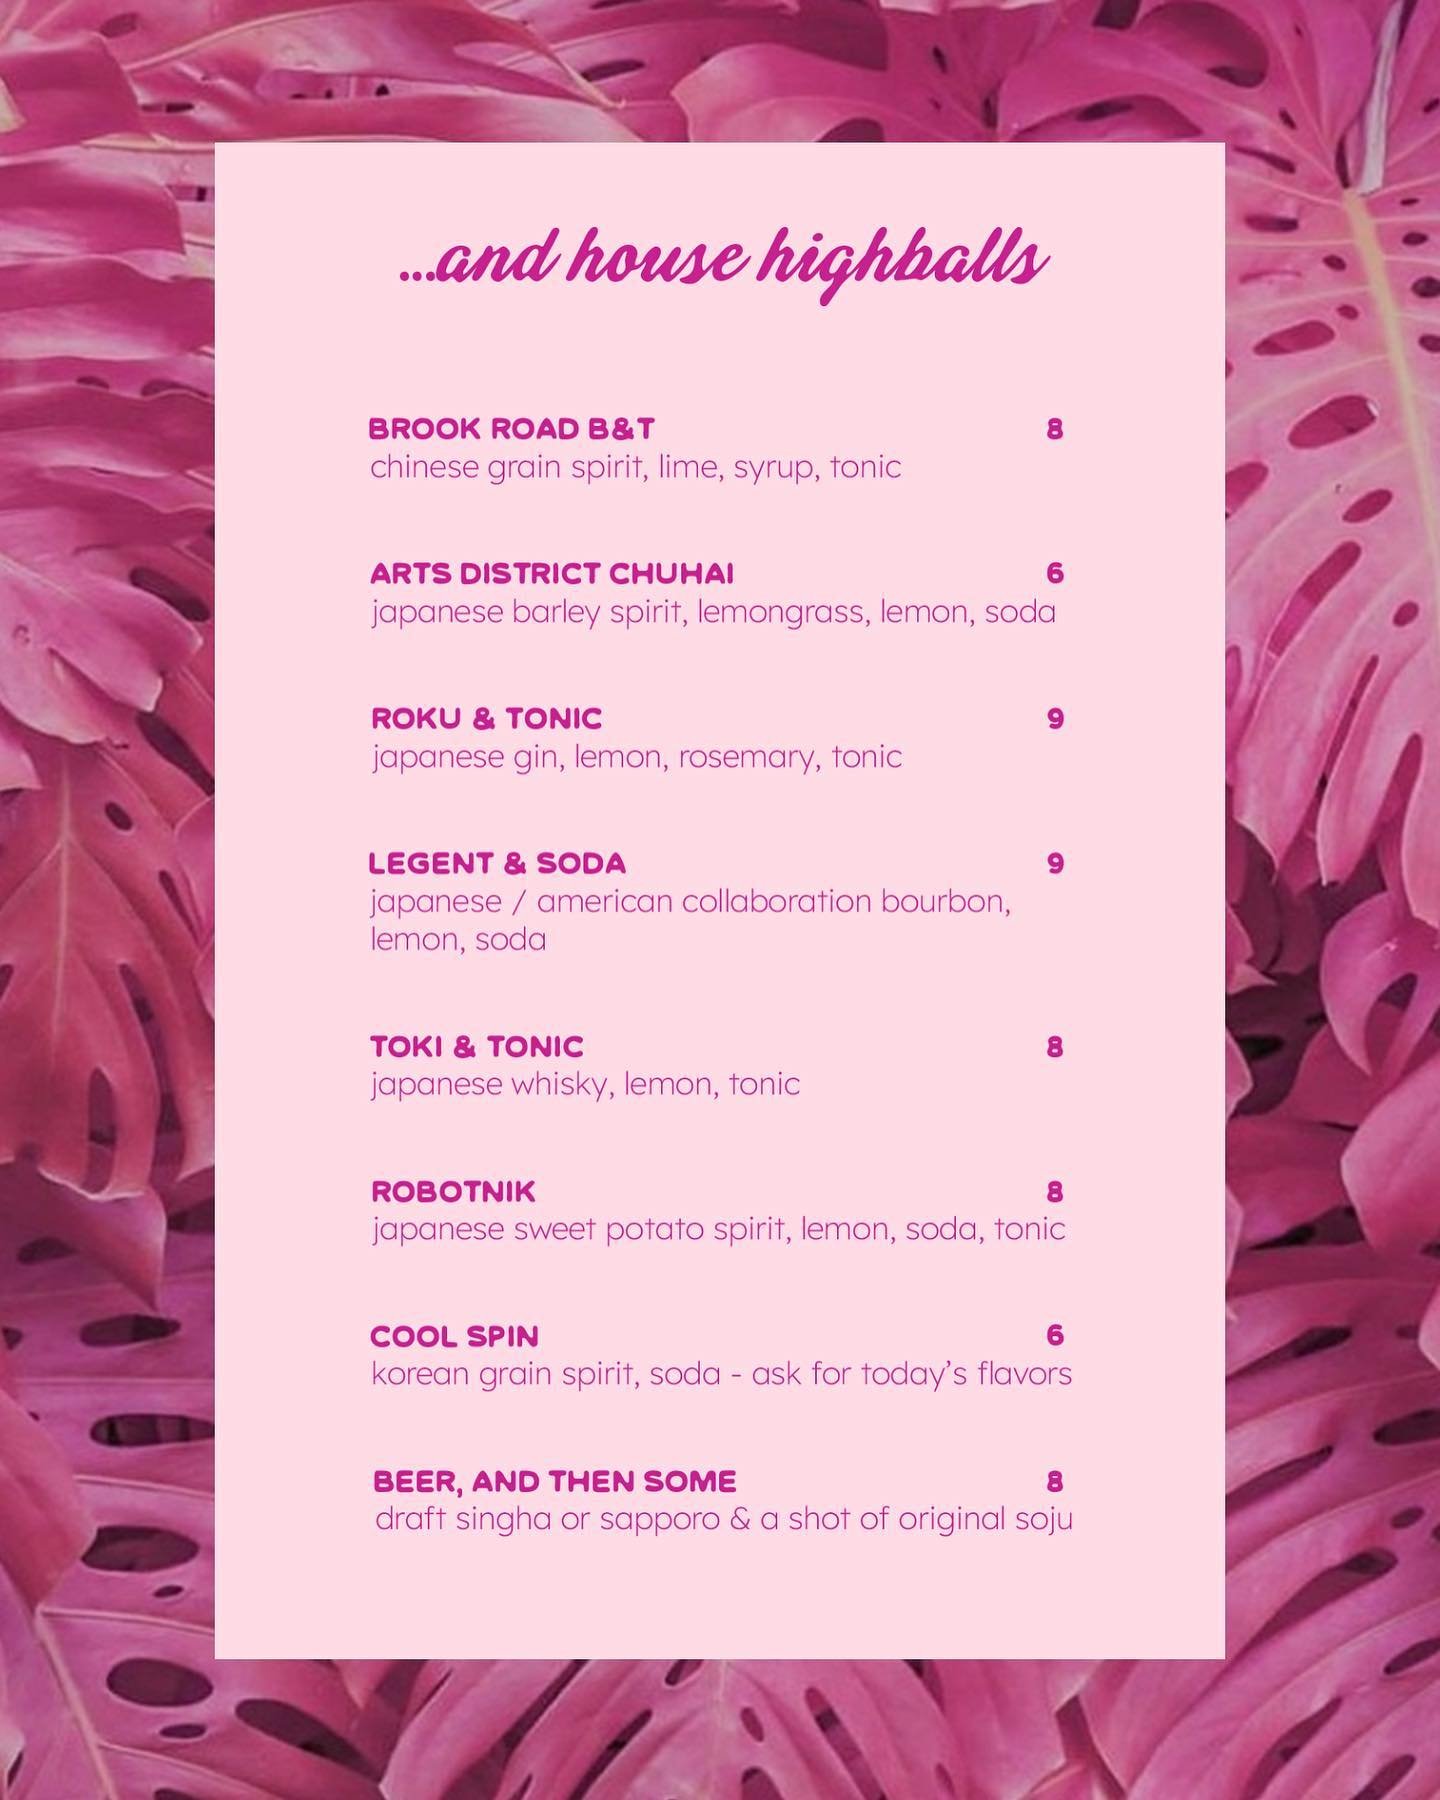 Tired of drinking your same ol&rsquo; go-to drink? Looking for a new warm weather favorite?? Oh baby, we got you! ✨

We&rsquo;ve put together a whole 🌸house highballs🌸 menu for you! Each drink features one of Asian spirits and is a perfect way for 